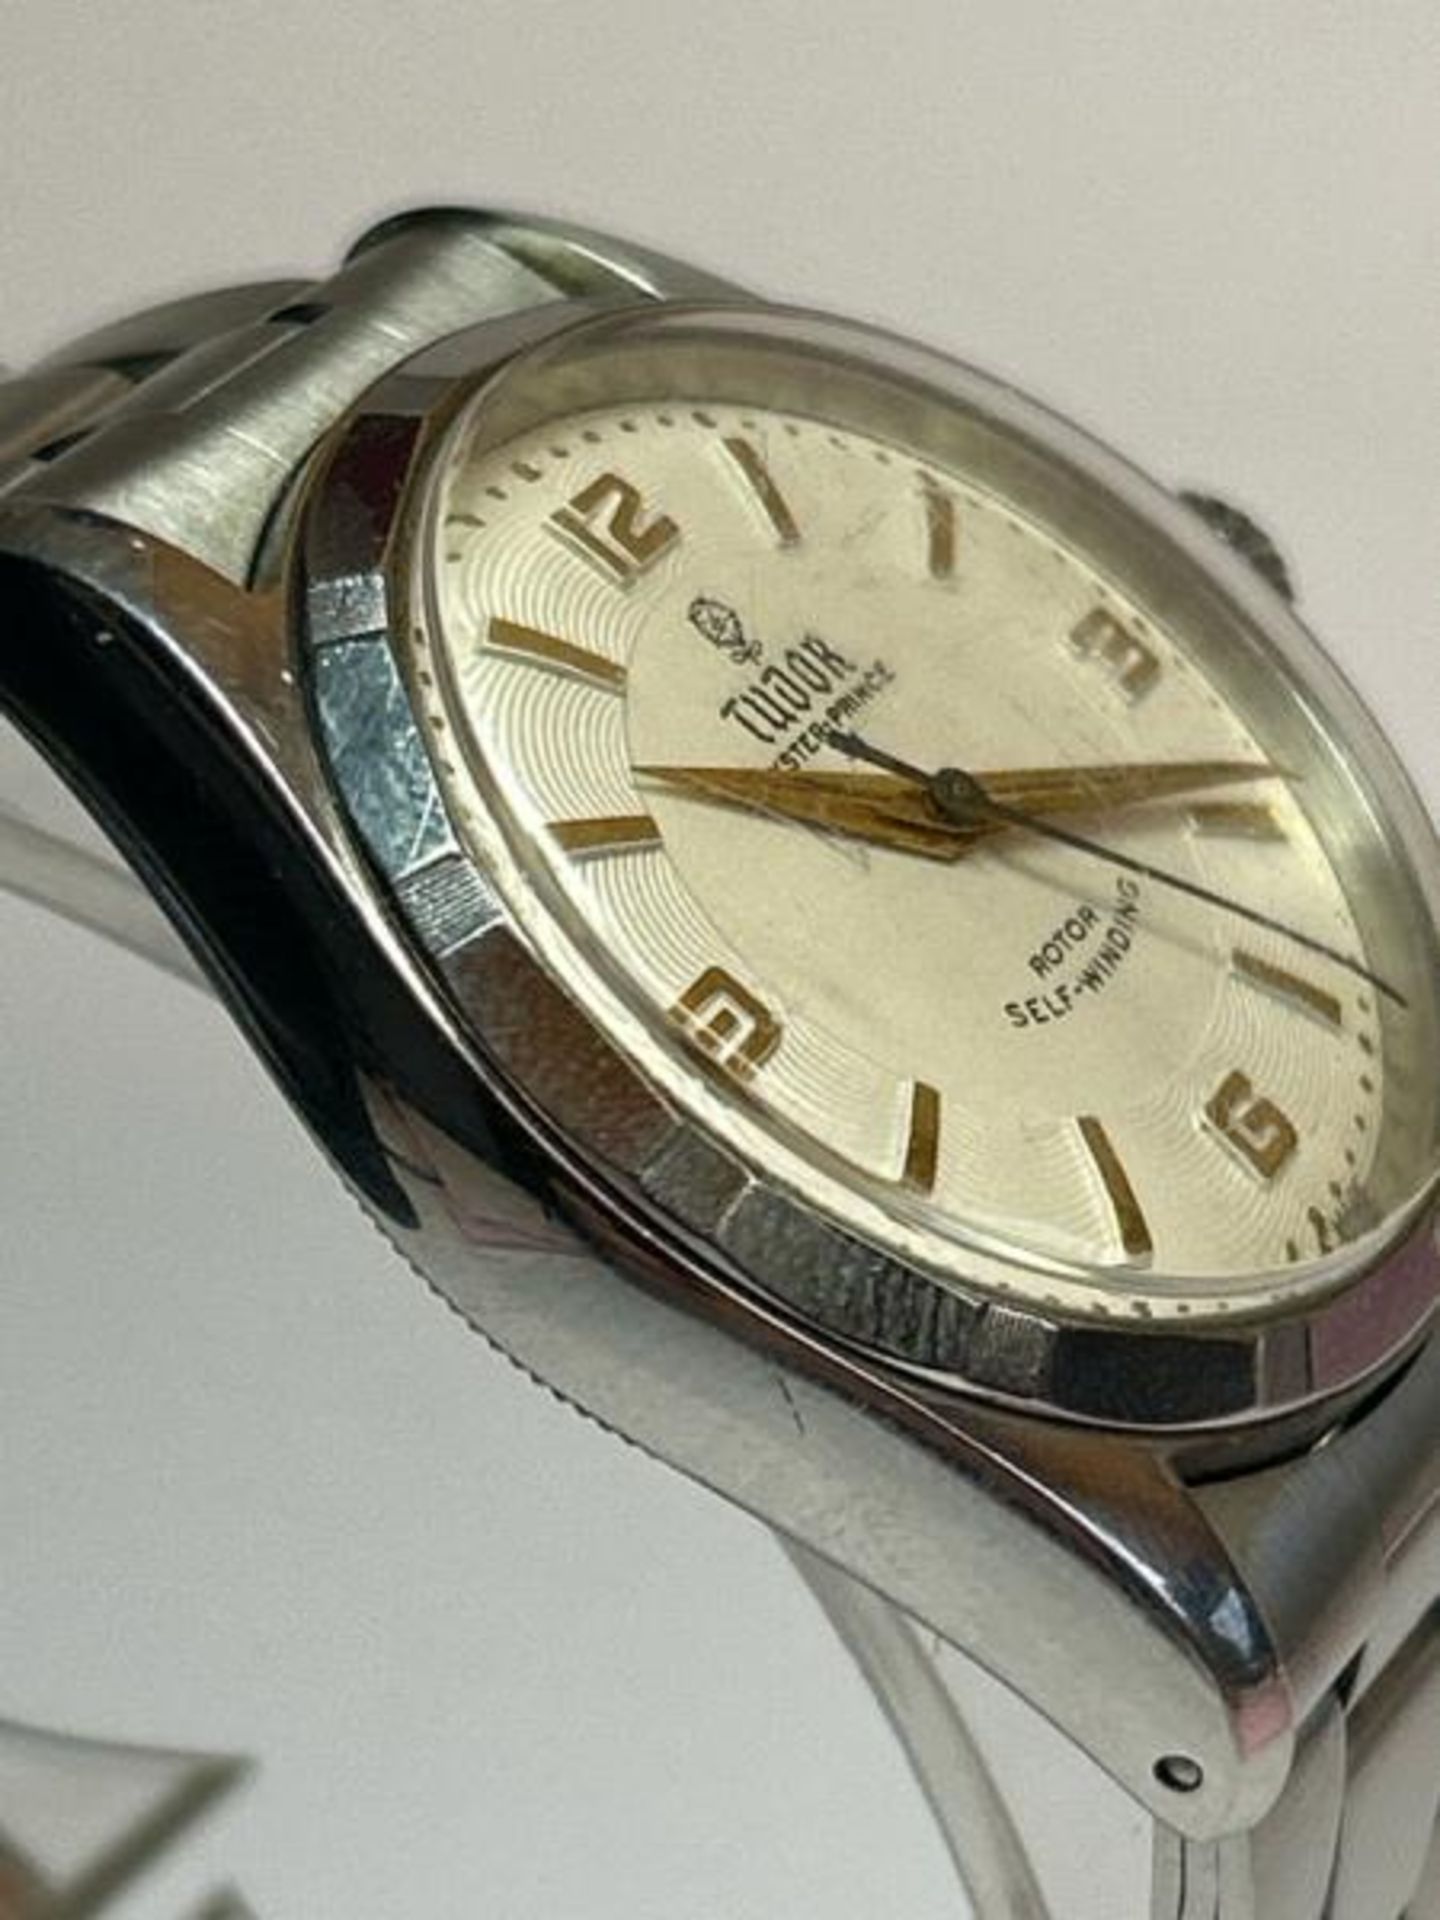 Tudor Oyster-Prince stainless steel perpetual gents watch no. 7909 152986, good condition with suede - Image 3 of 6